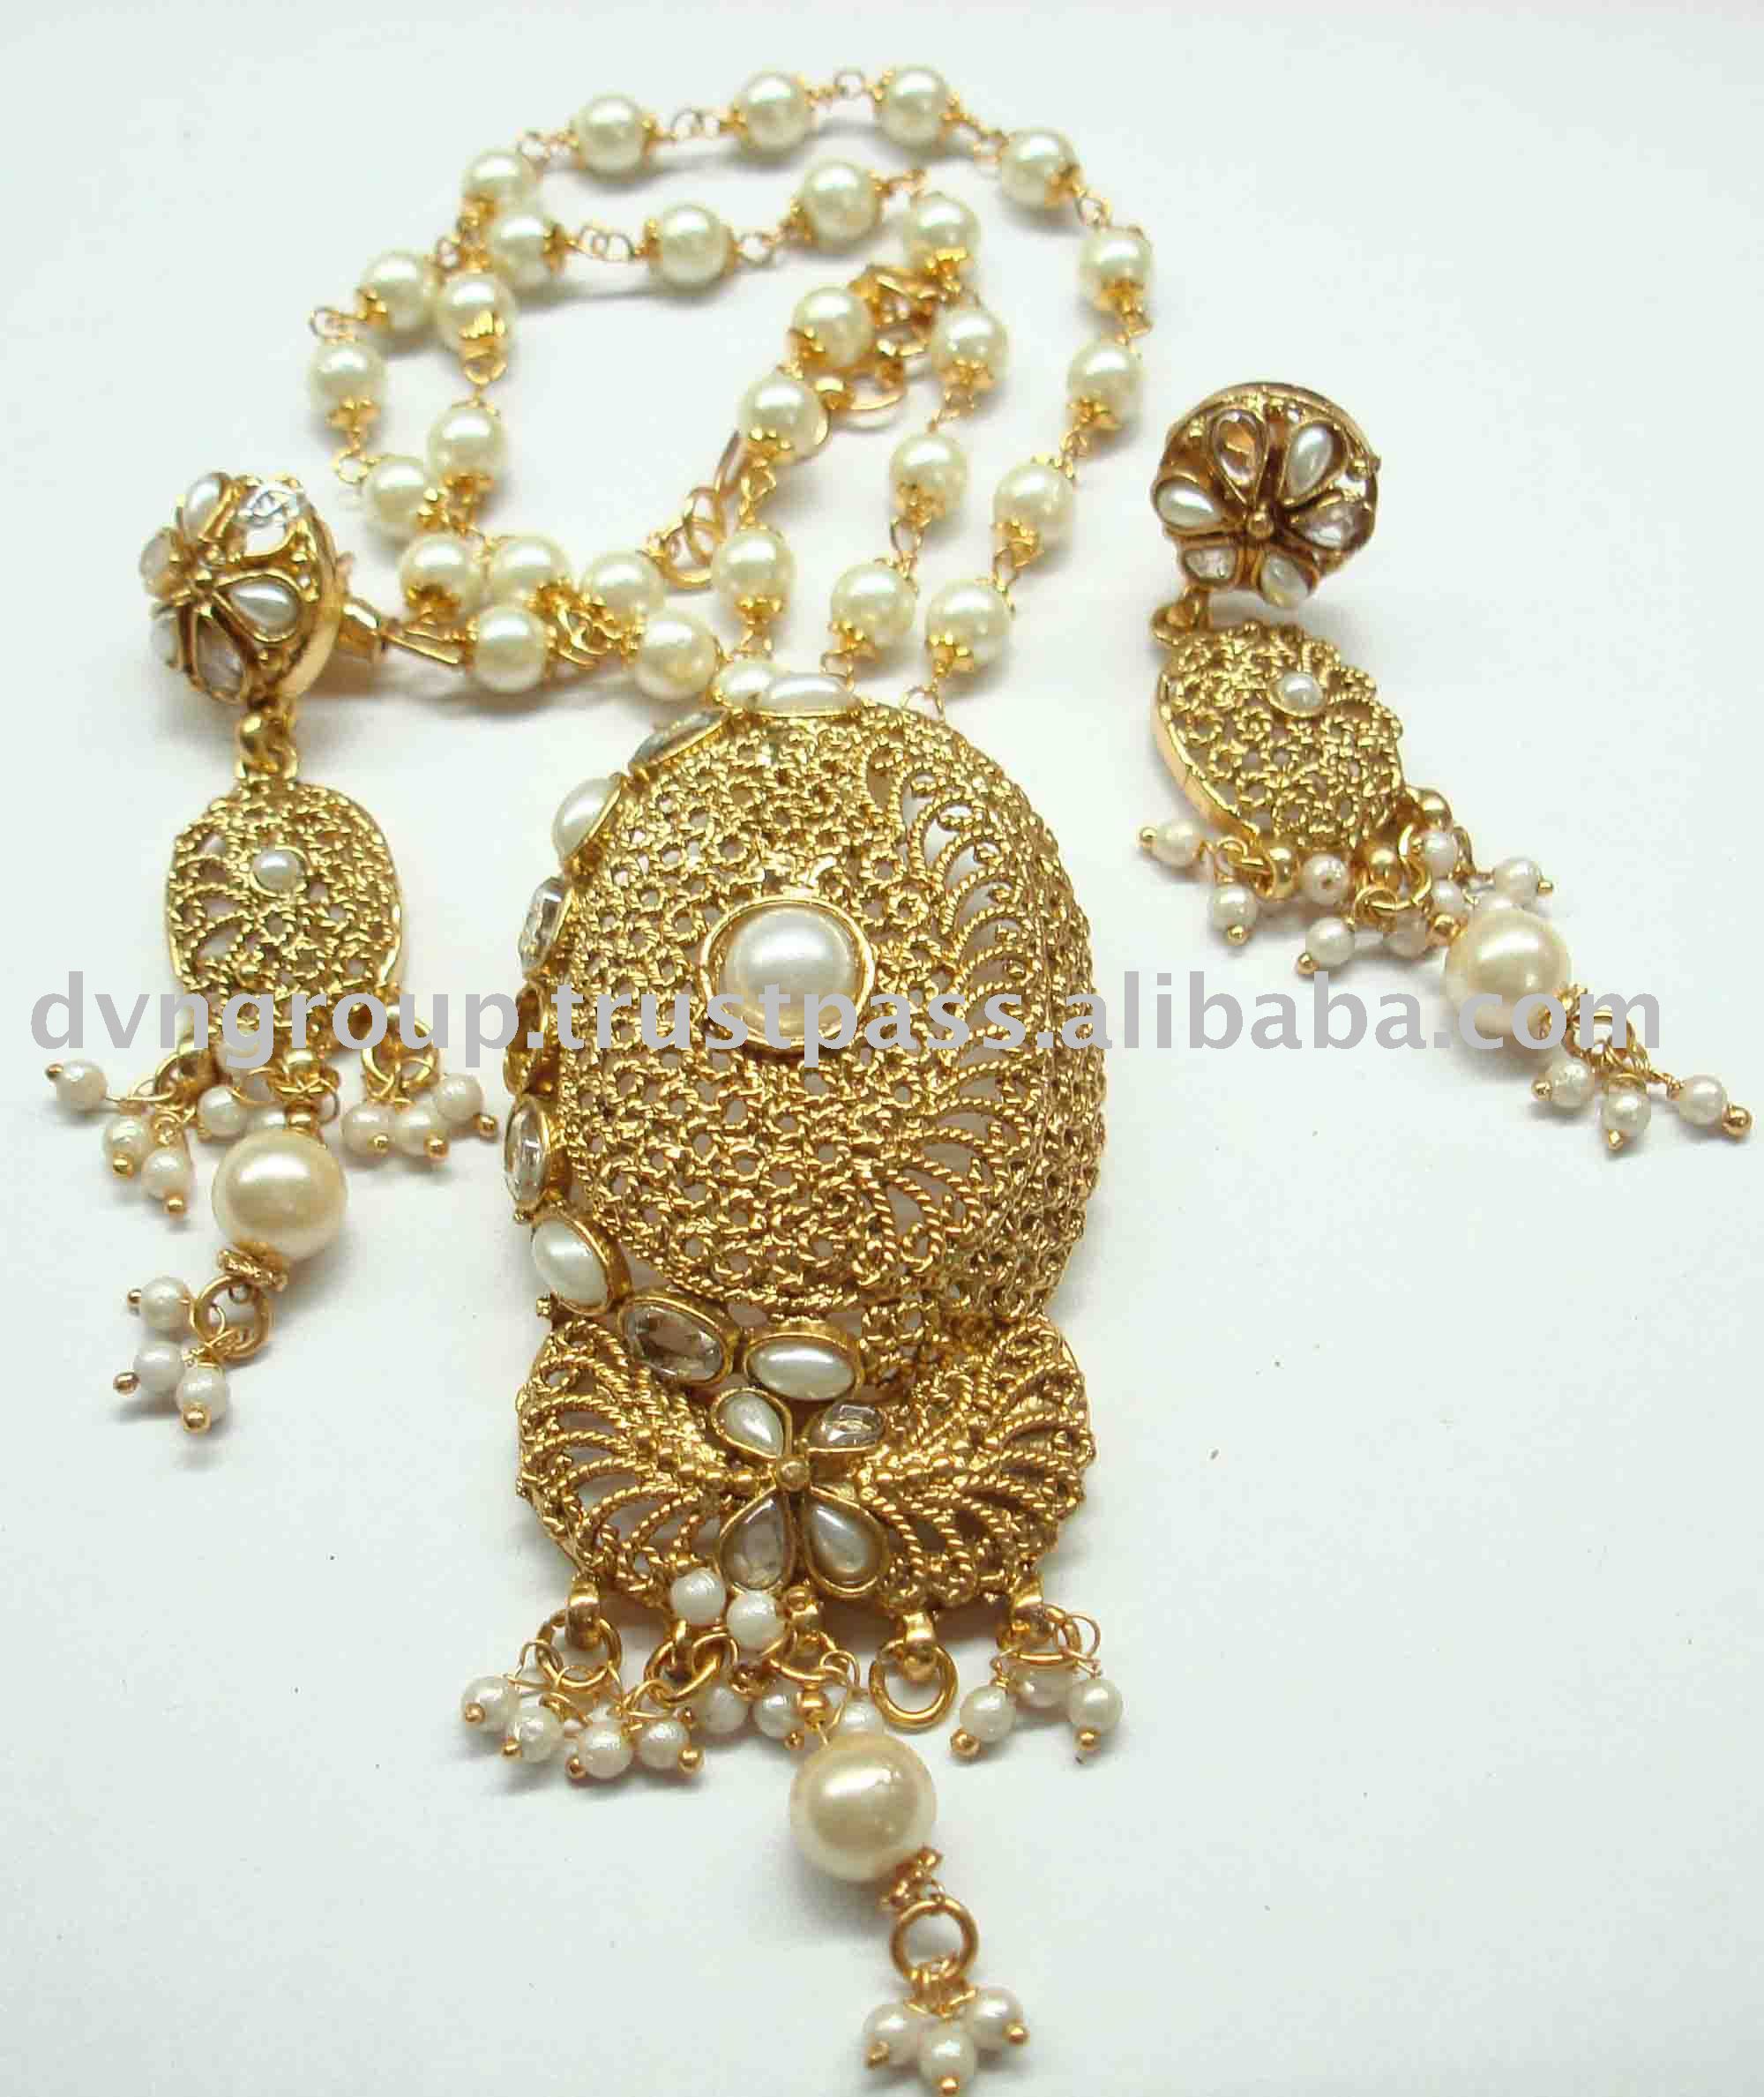 View Product Details: Indian fashion Jewelry